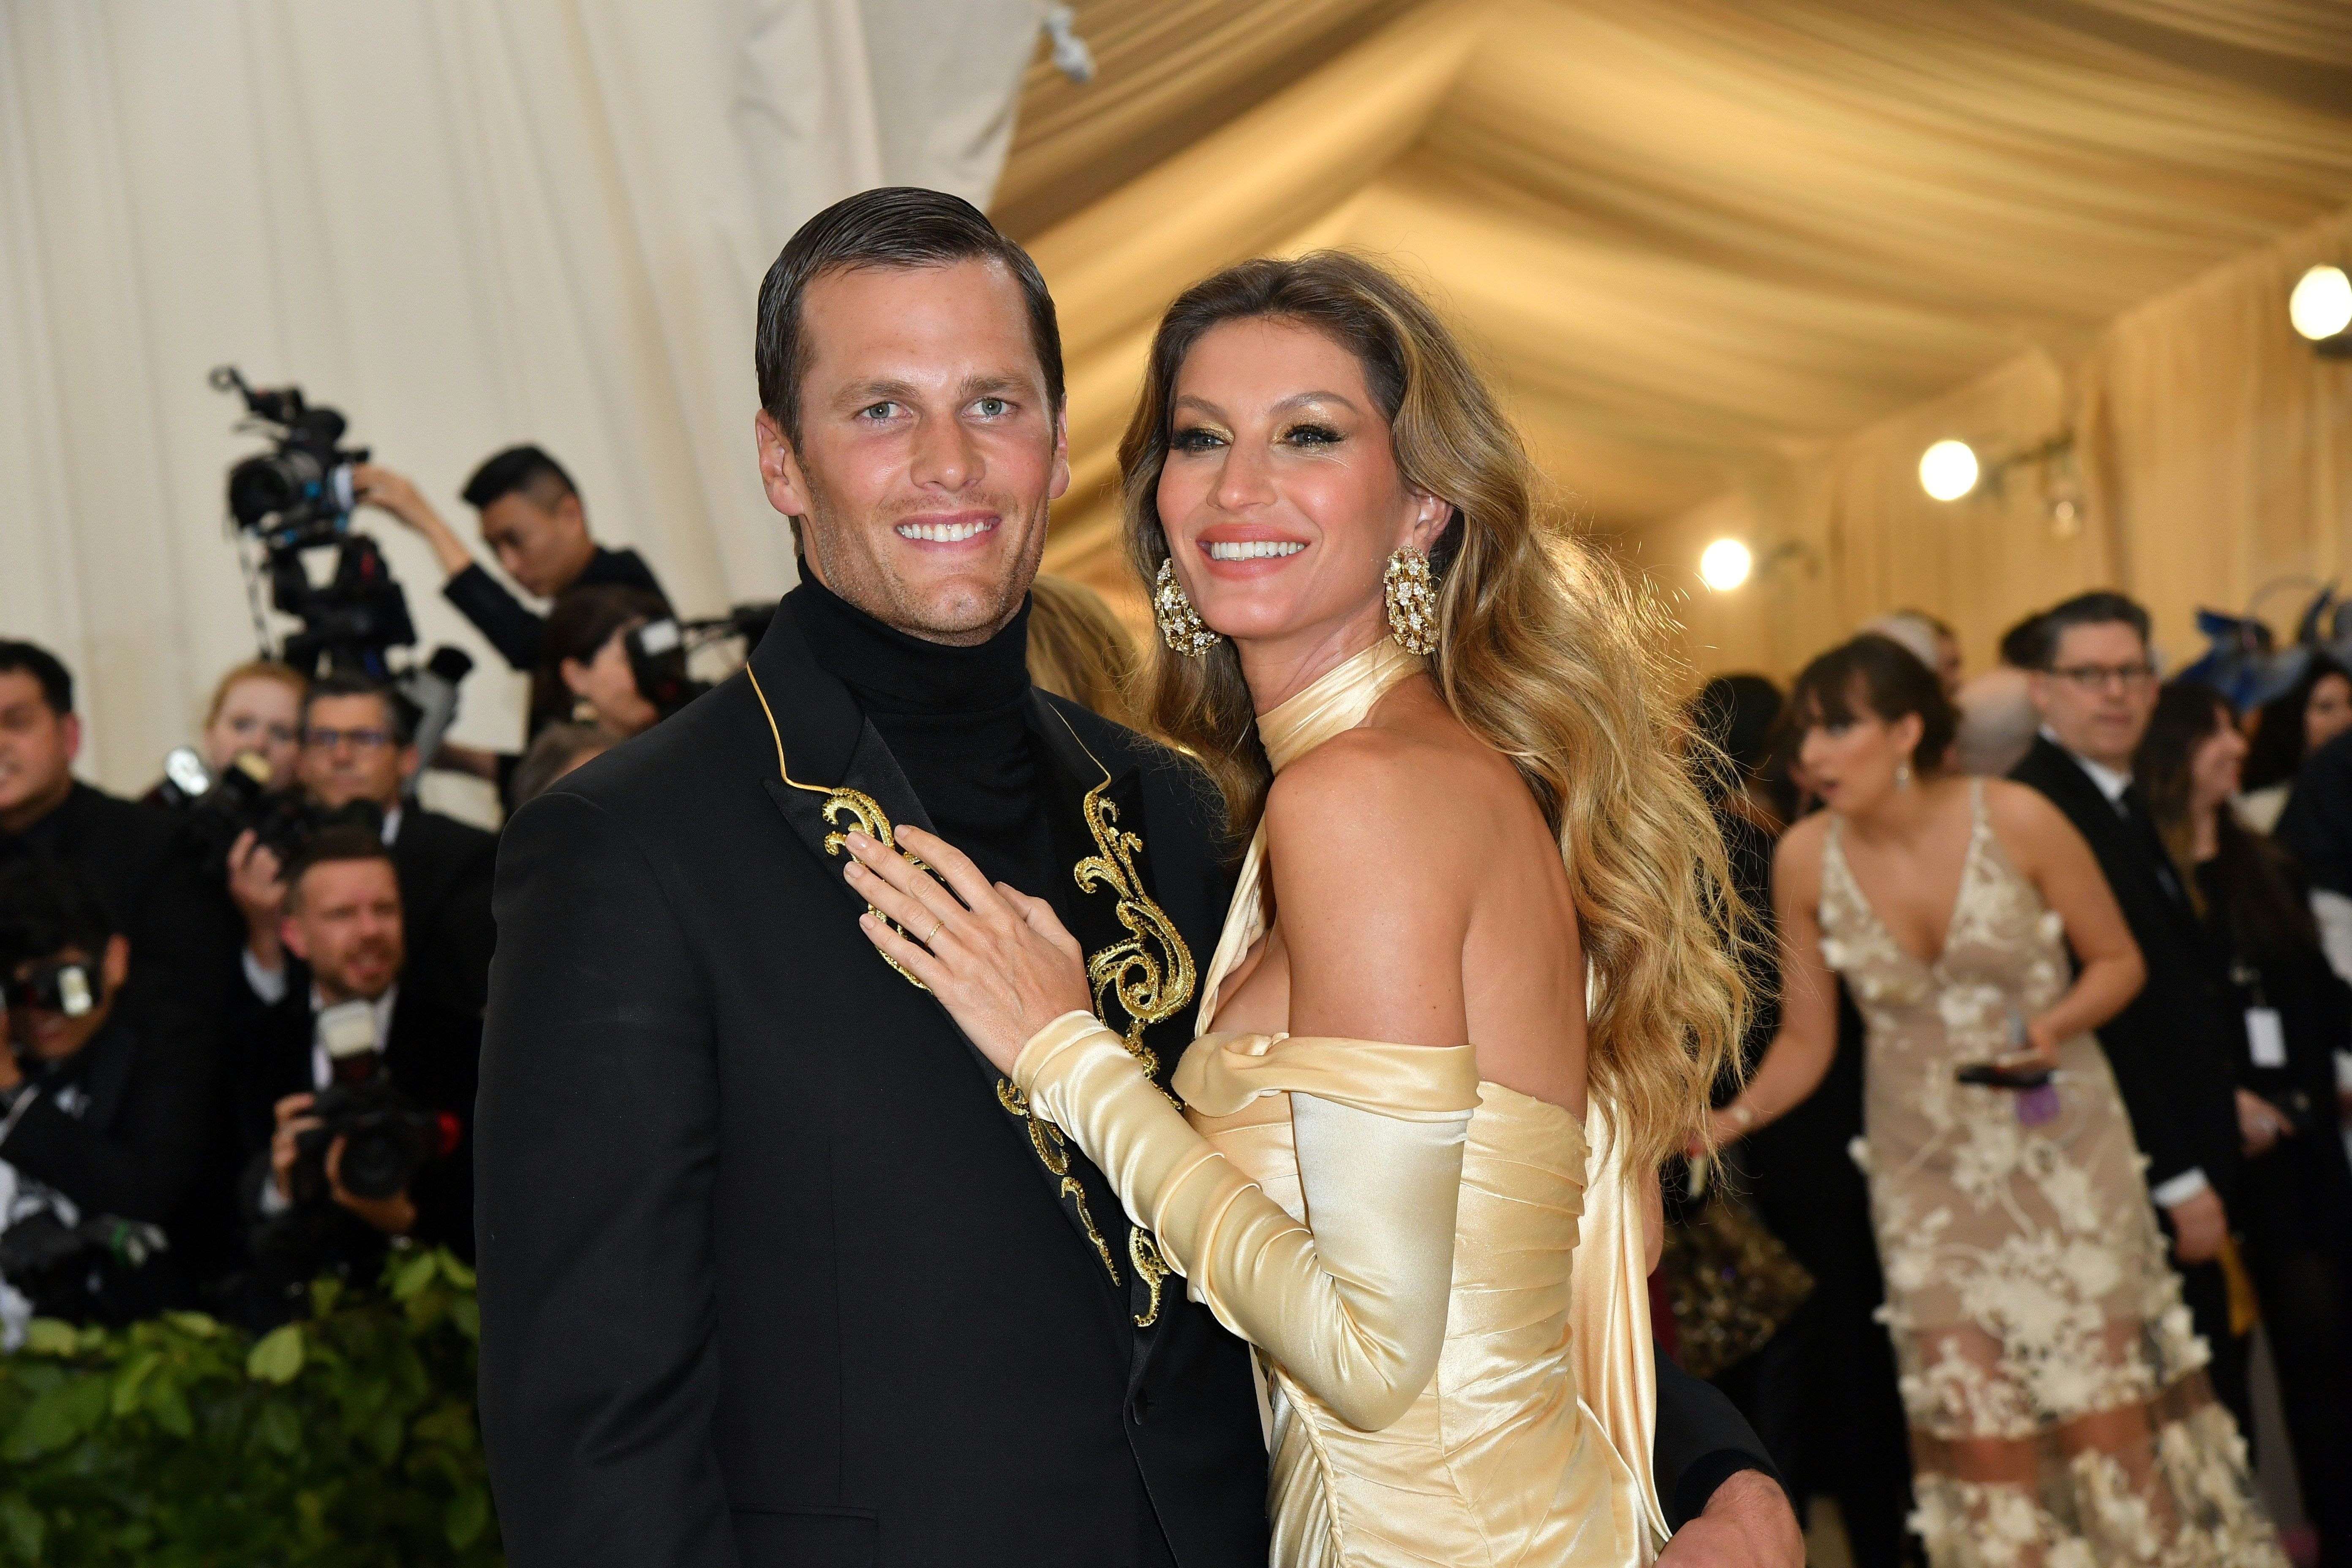 Tom Brady Is Retiring from Football “for Good” After Gisele Bündchen Divorce